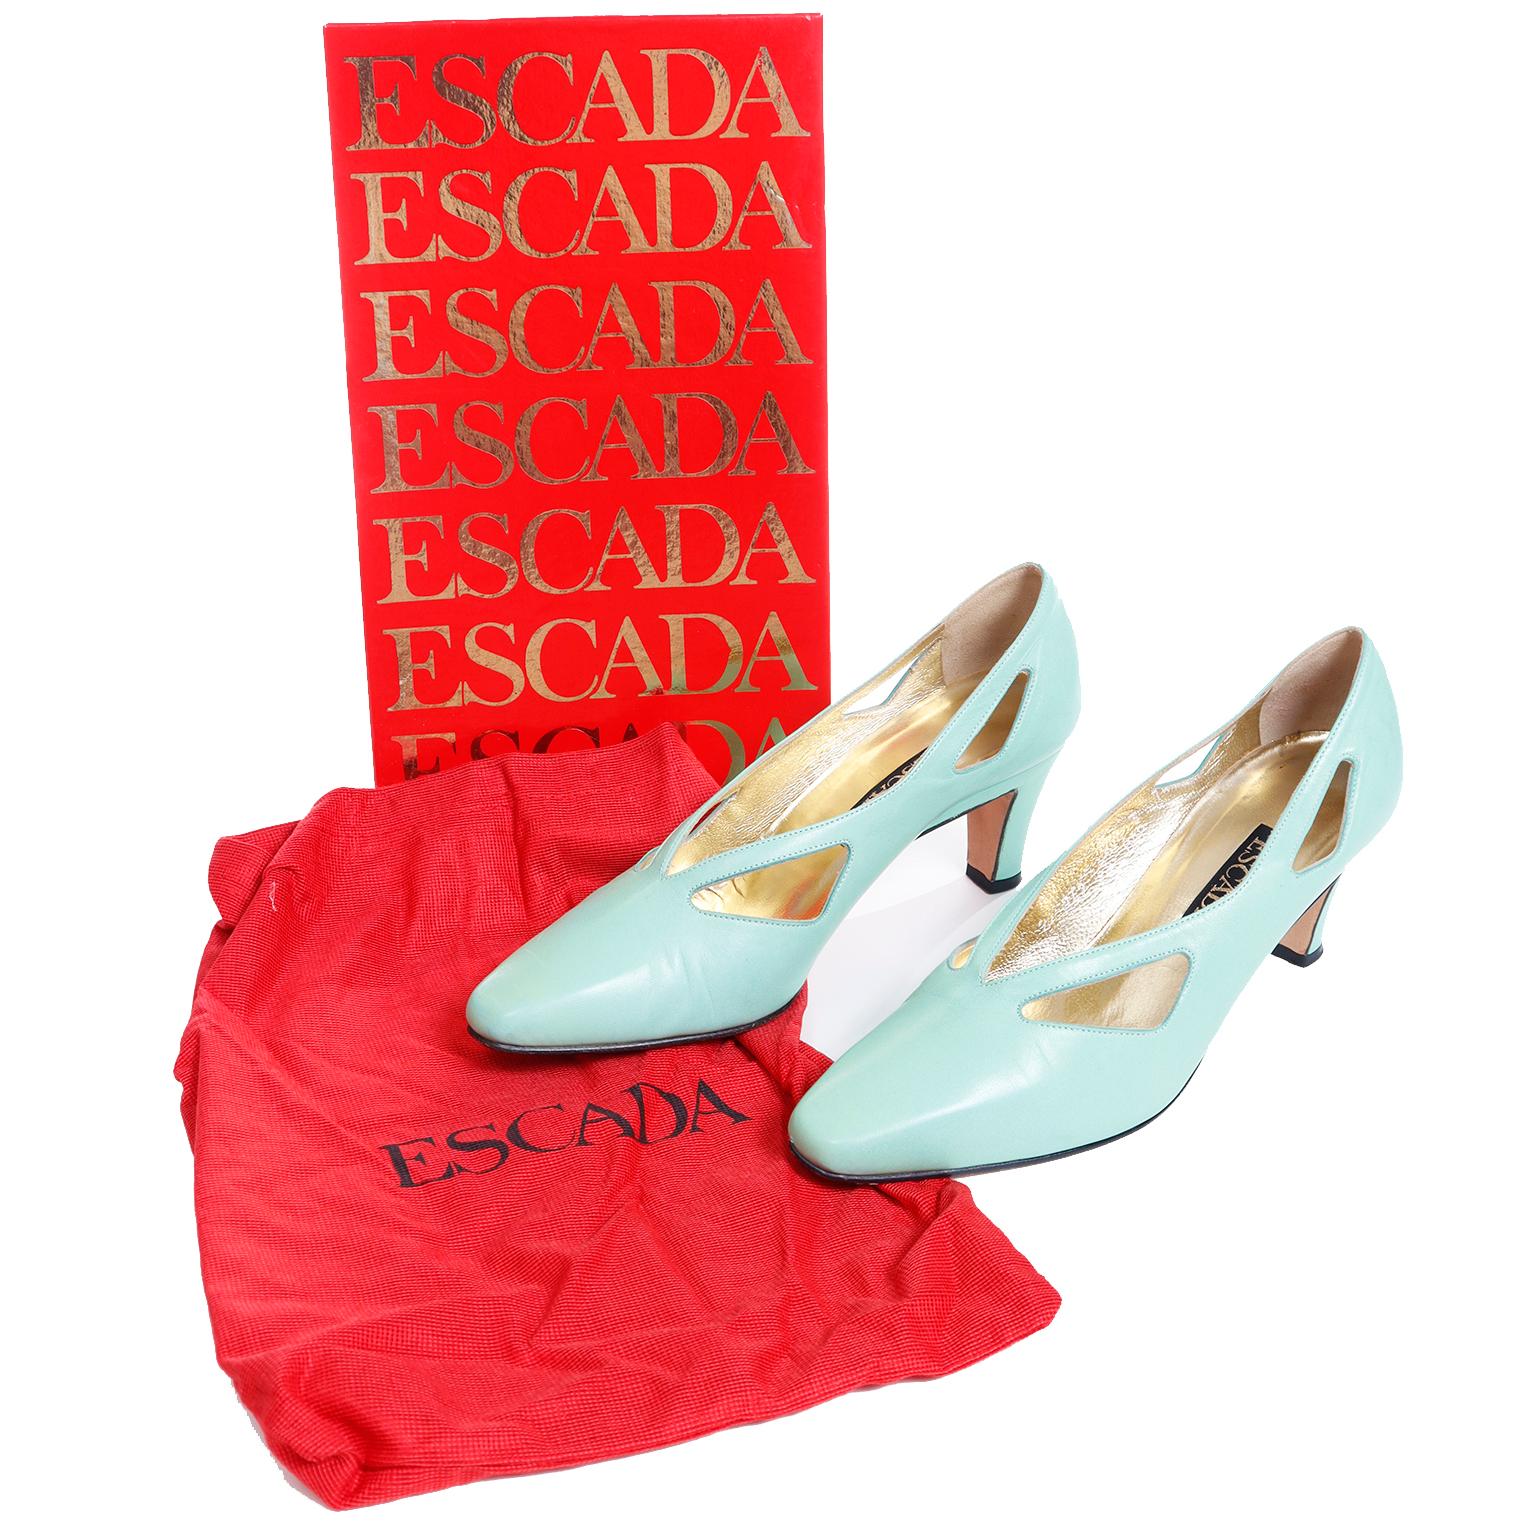 These fun Escada vintage 1980's shoes have unique cutouts and are in a soft mint green kid leather. The shoes are marked a size 7B and come with their original box and dust bag. The interiors are a beautiful gold lame and these were made in Italy in